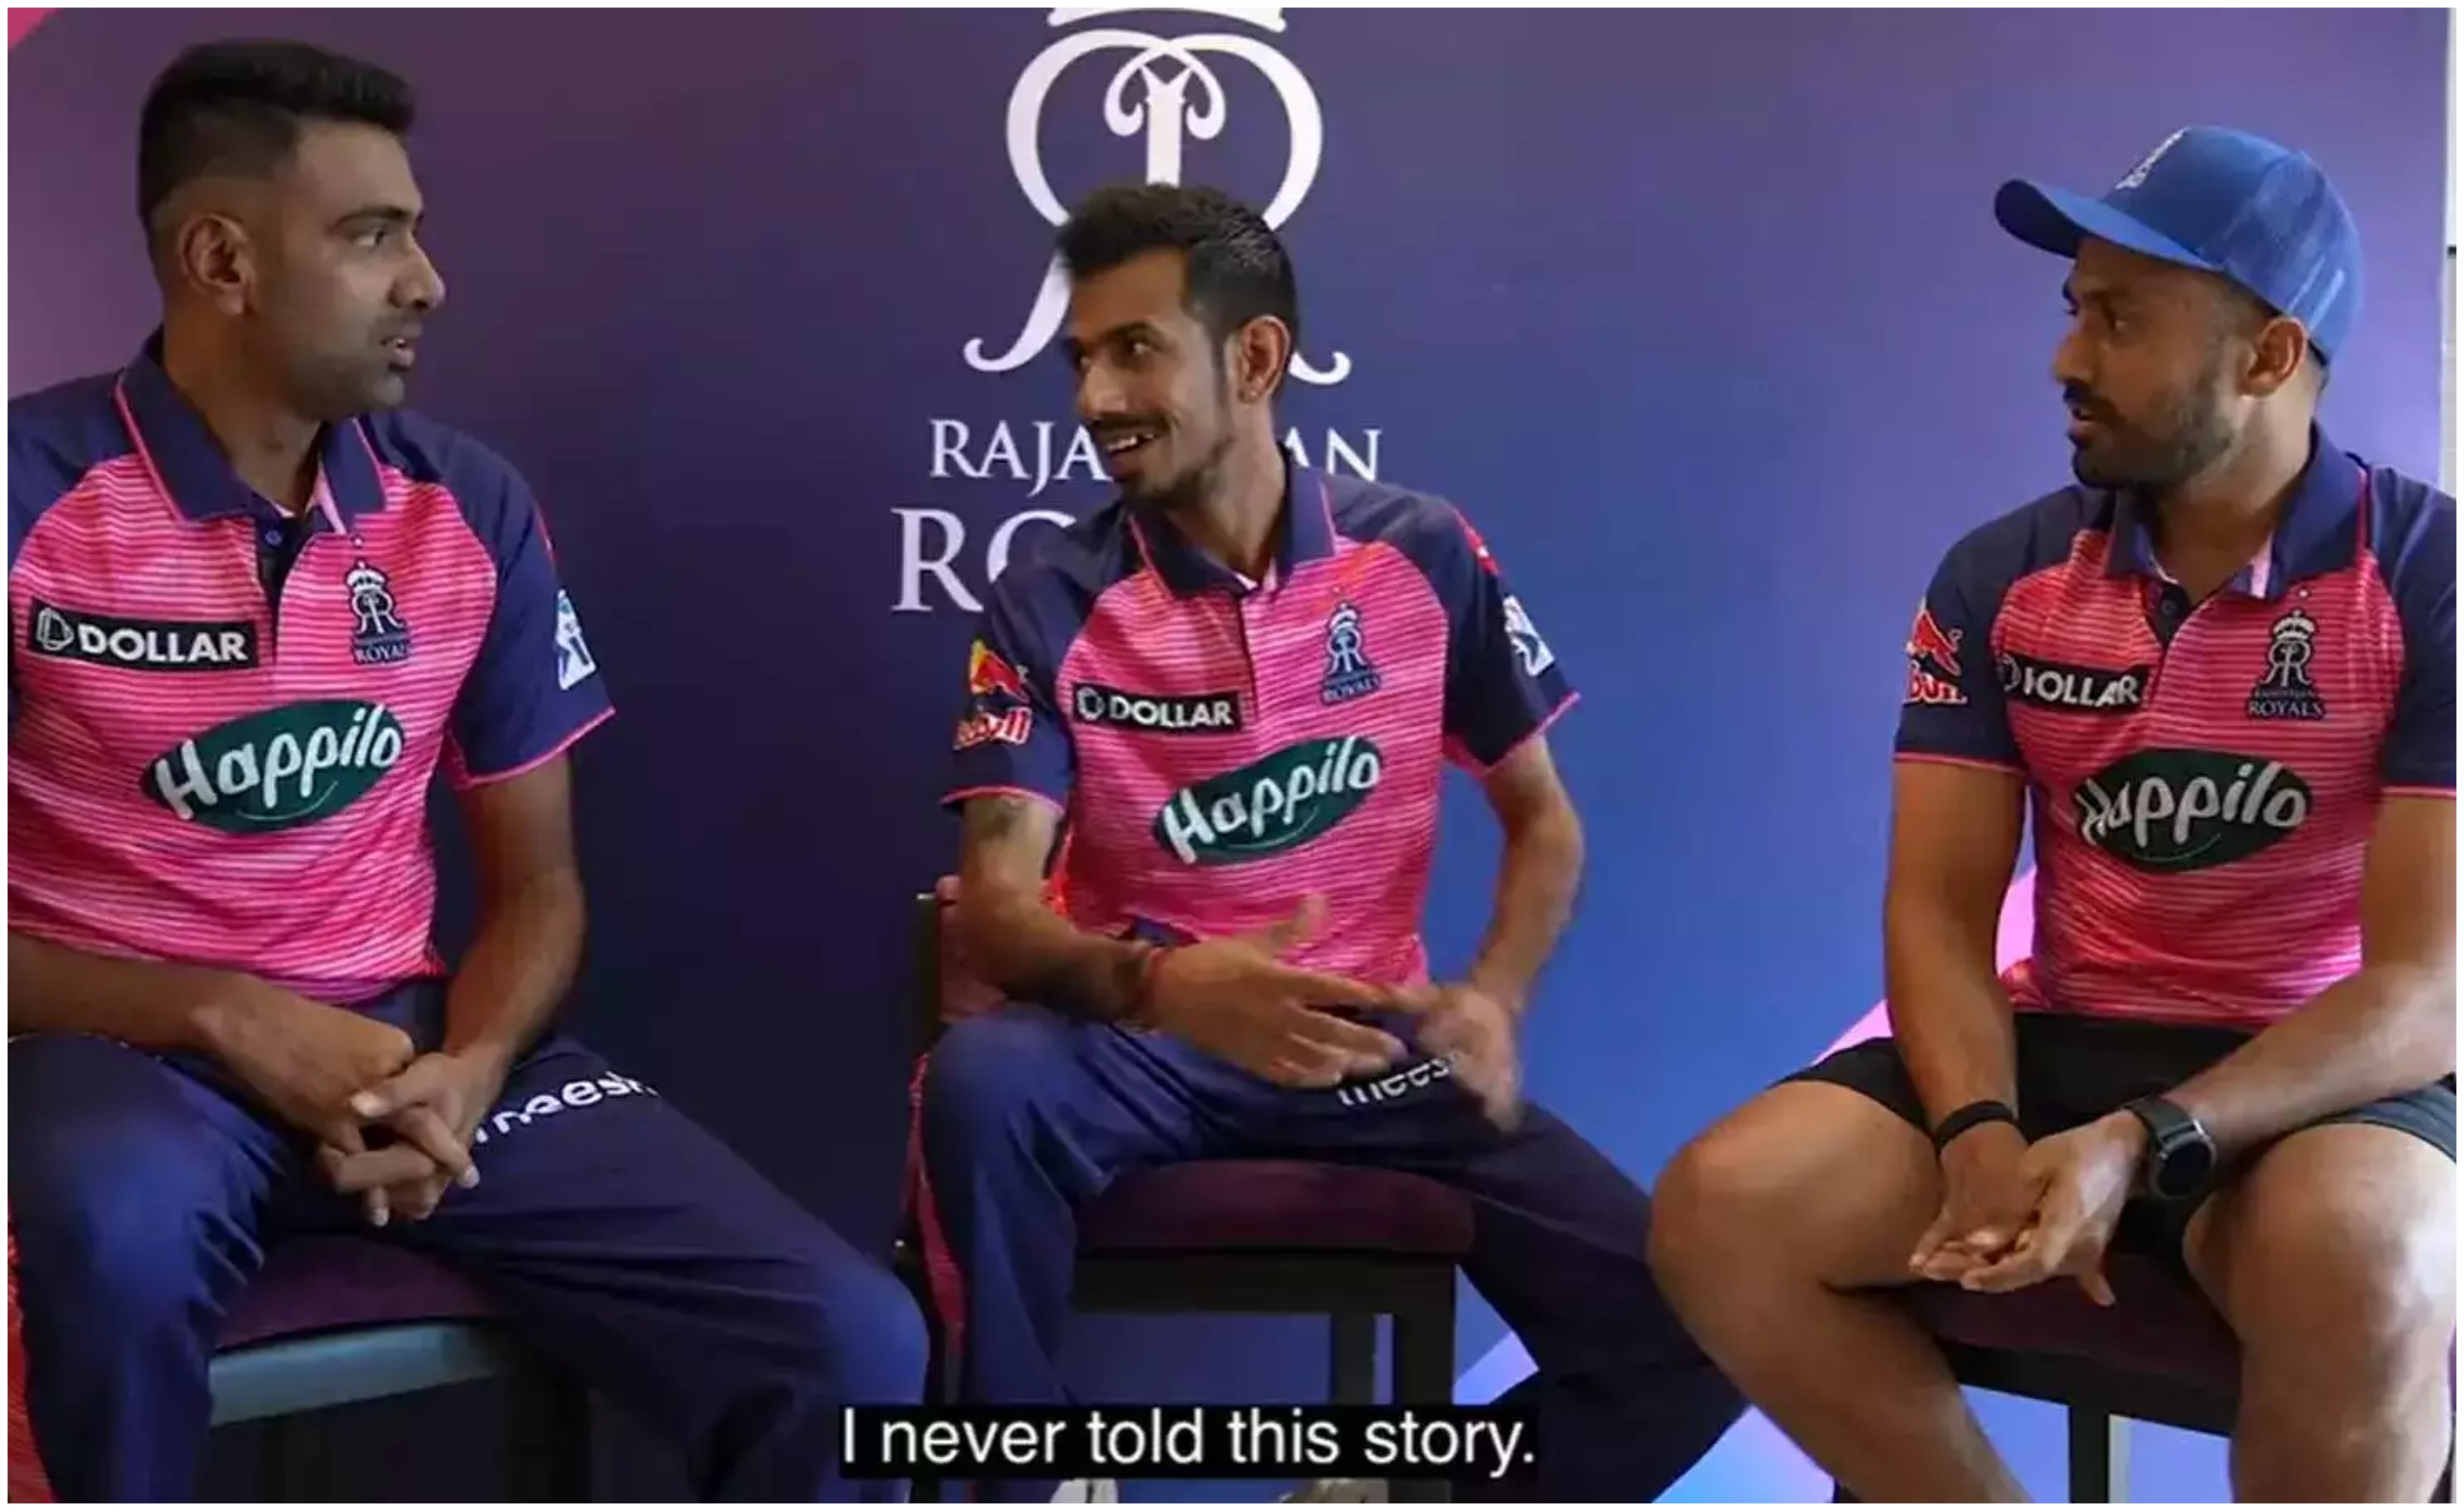 Chahal in conversation with Ashwin and Nair | RR/Twitter